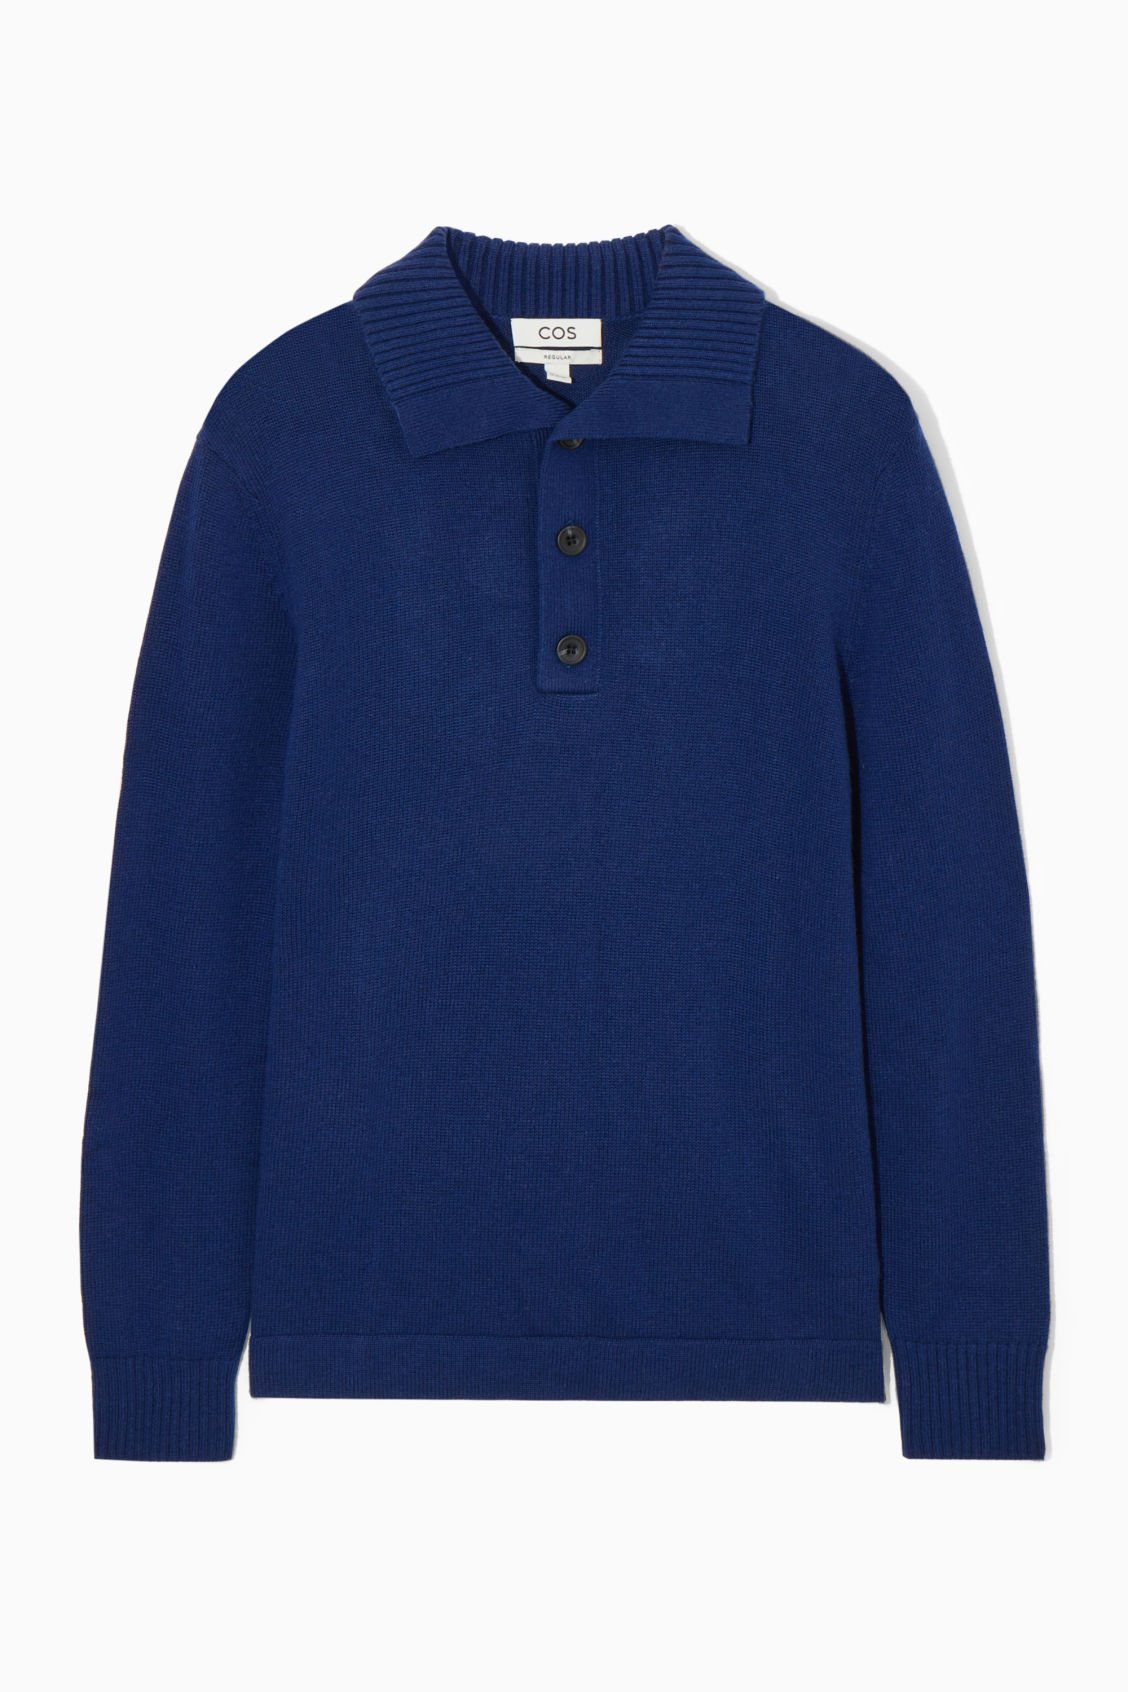 COS Wool And Cashmere Polo Shirt | Endource